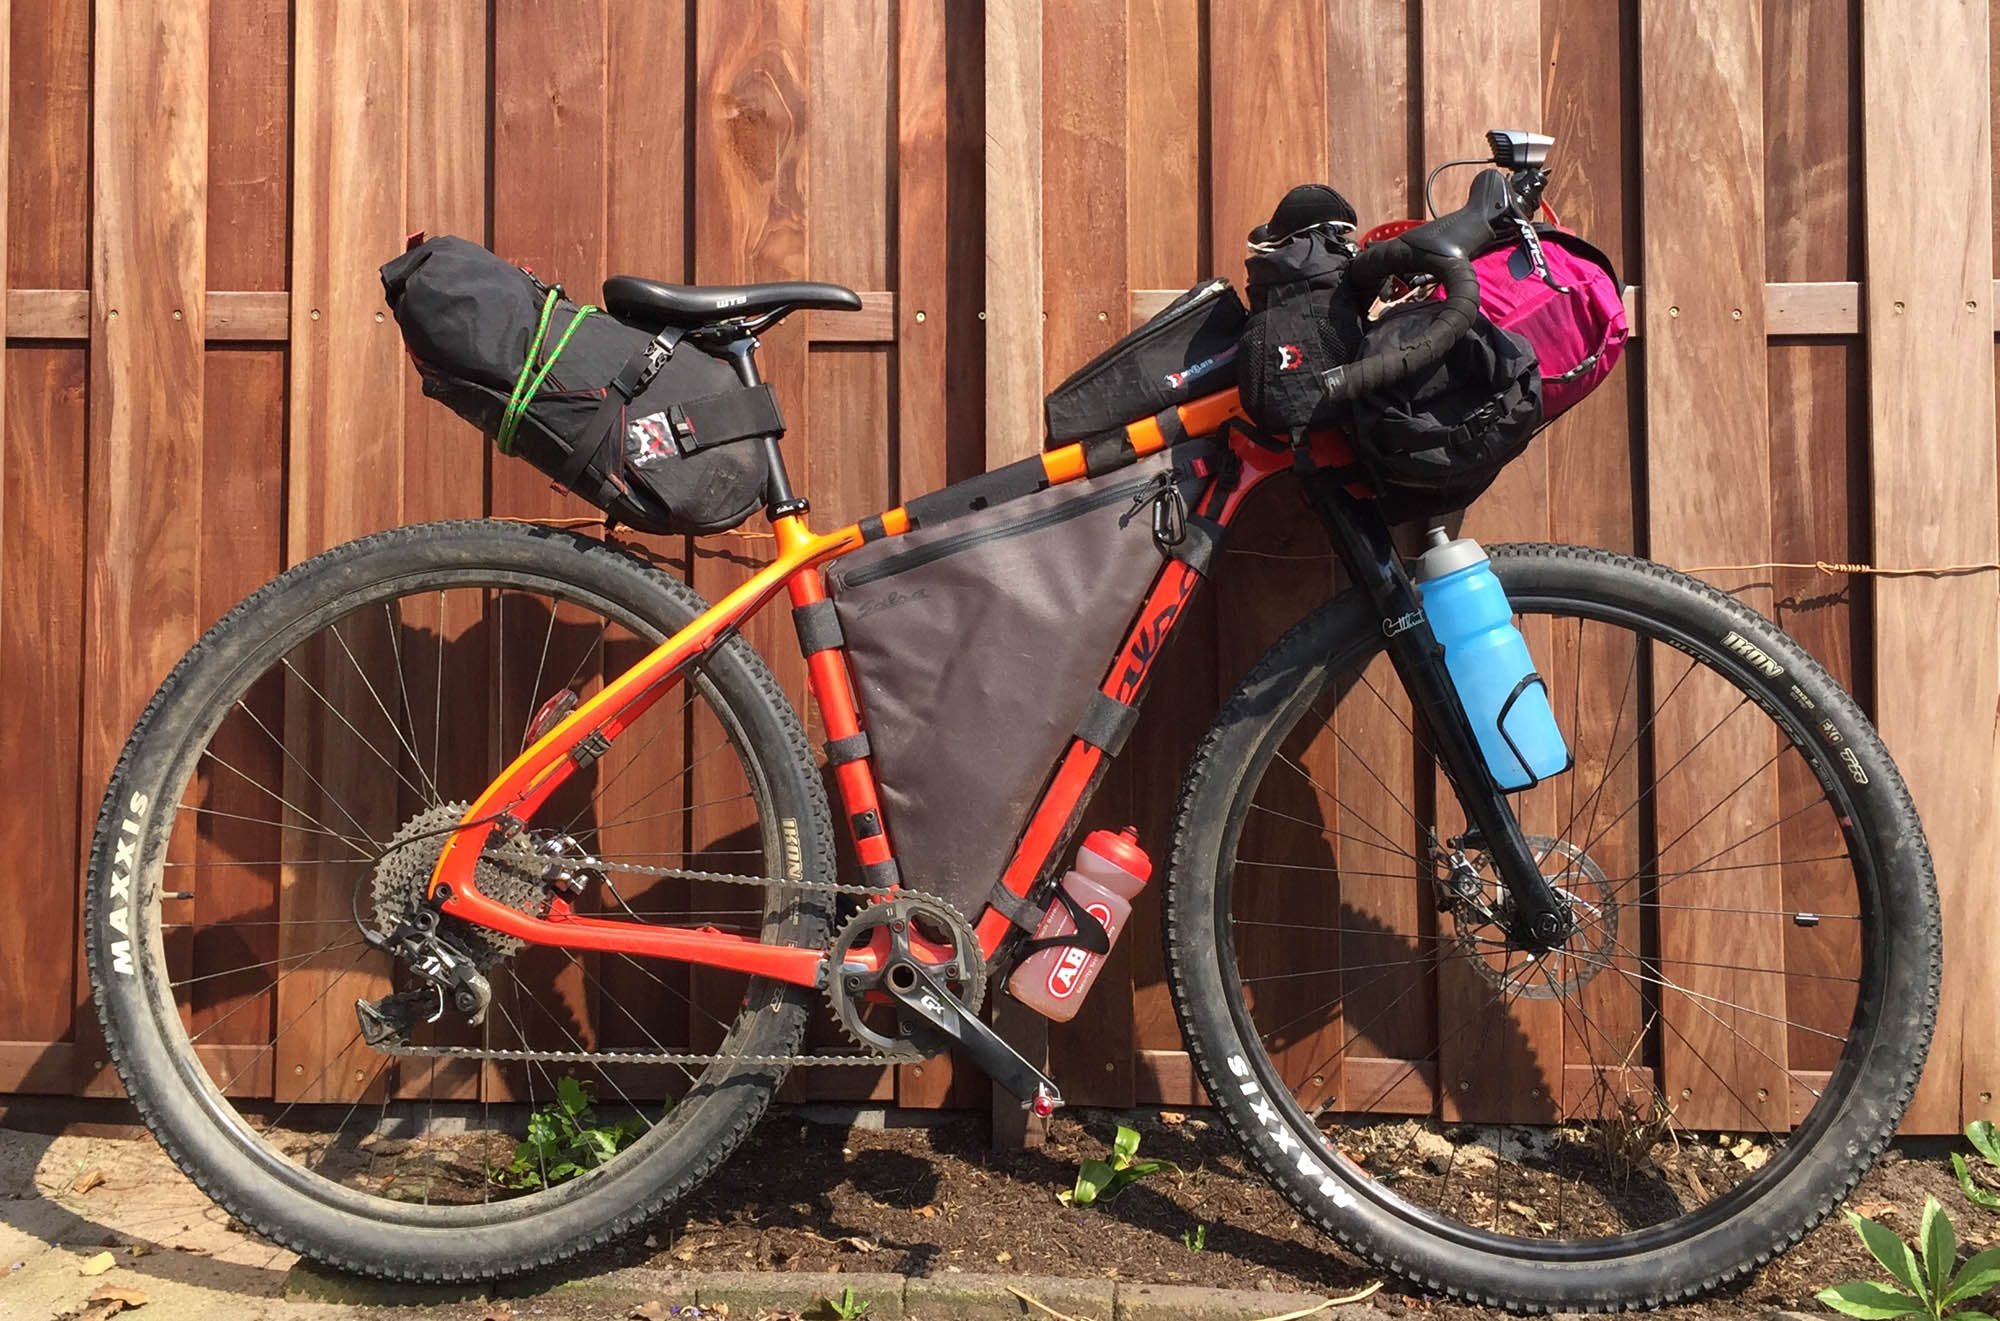 Rigs of The 2019 Tour Divide